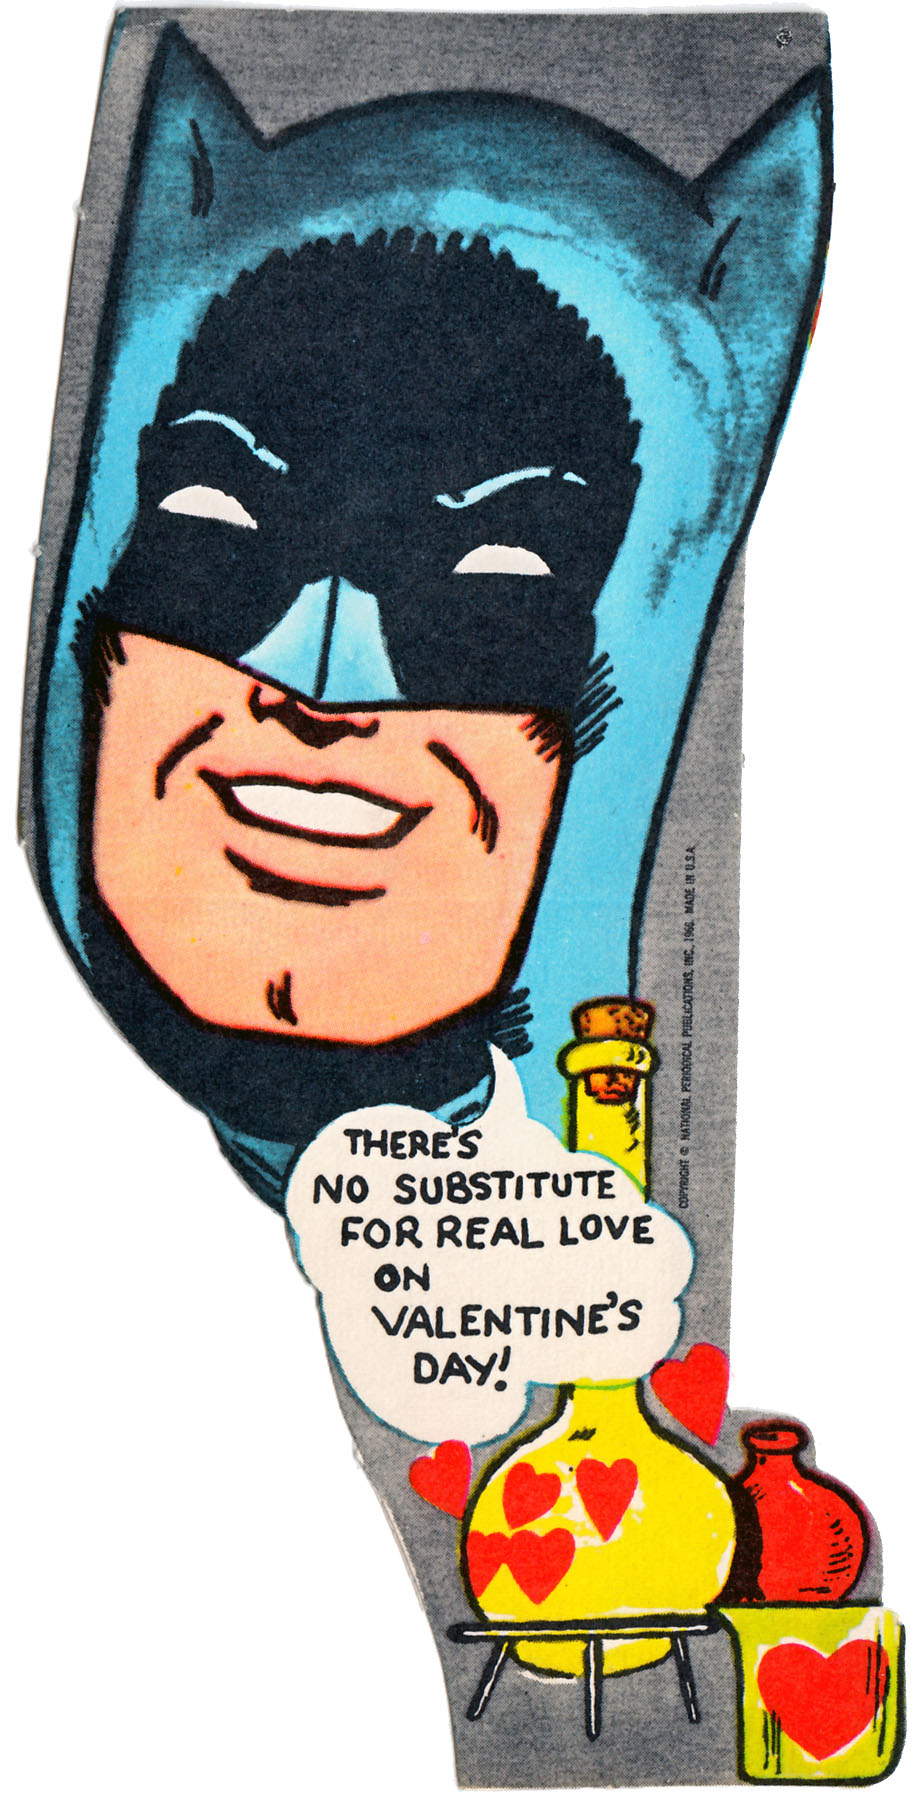 Surprise Your Valentine With Batman Cards From The 60s » Fanboy.com